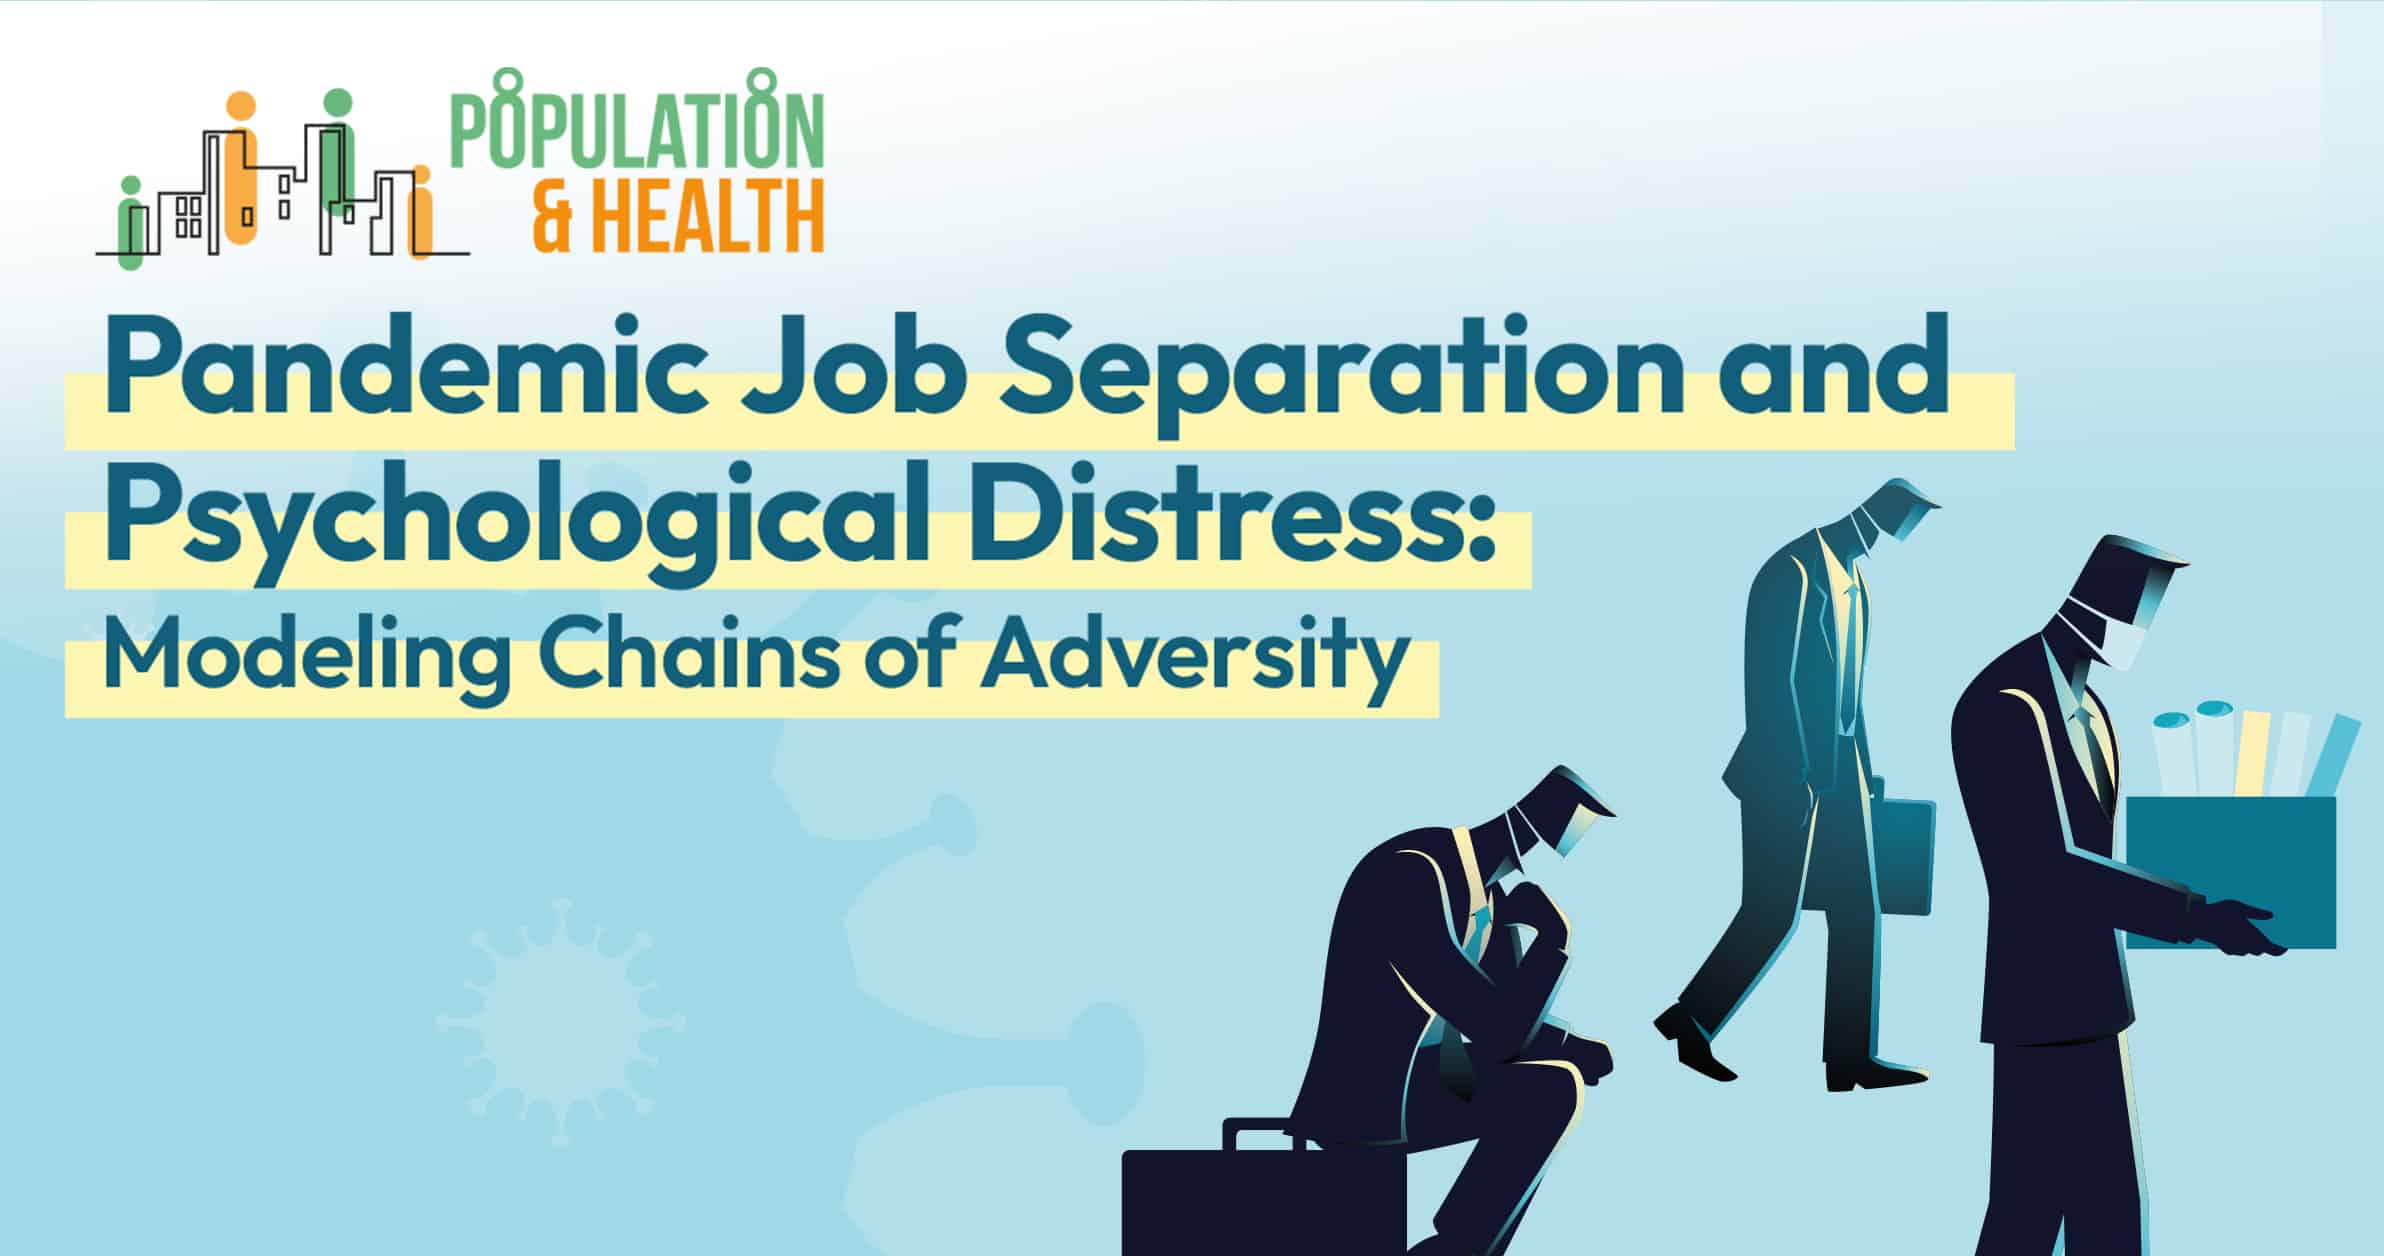 Pandemic Job Separation and Psychological Distress: Modeling Chains of Adversity